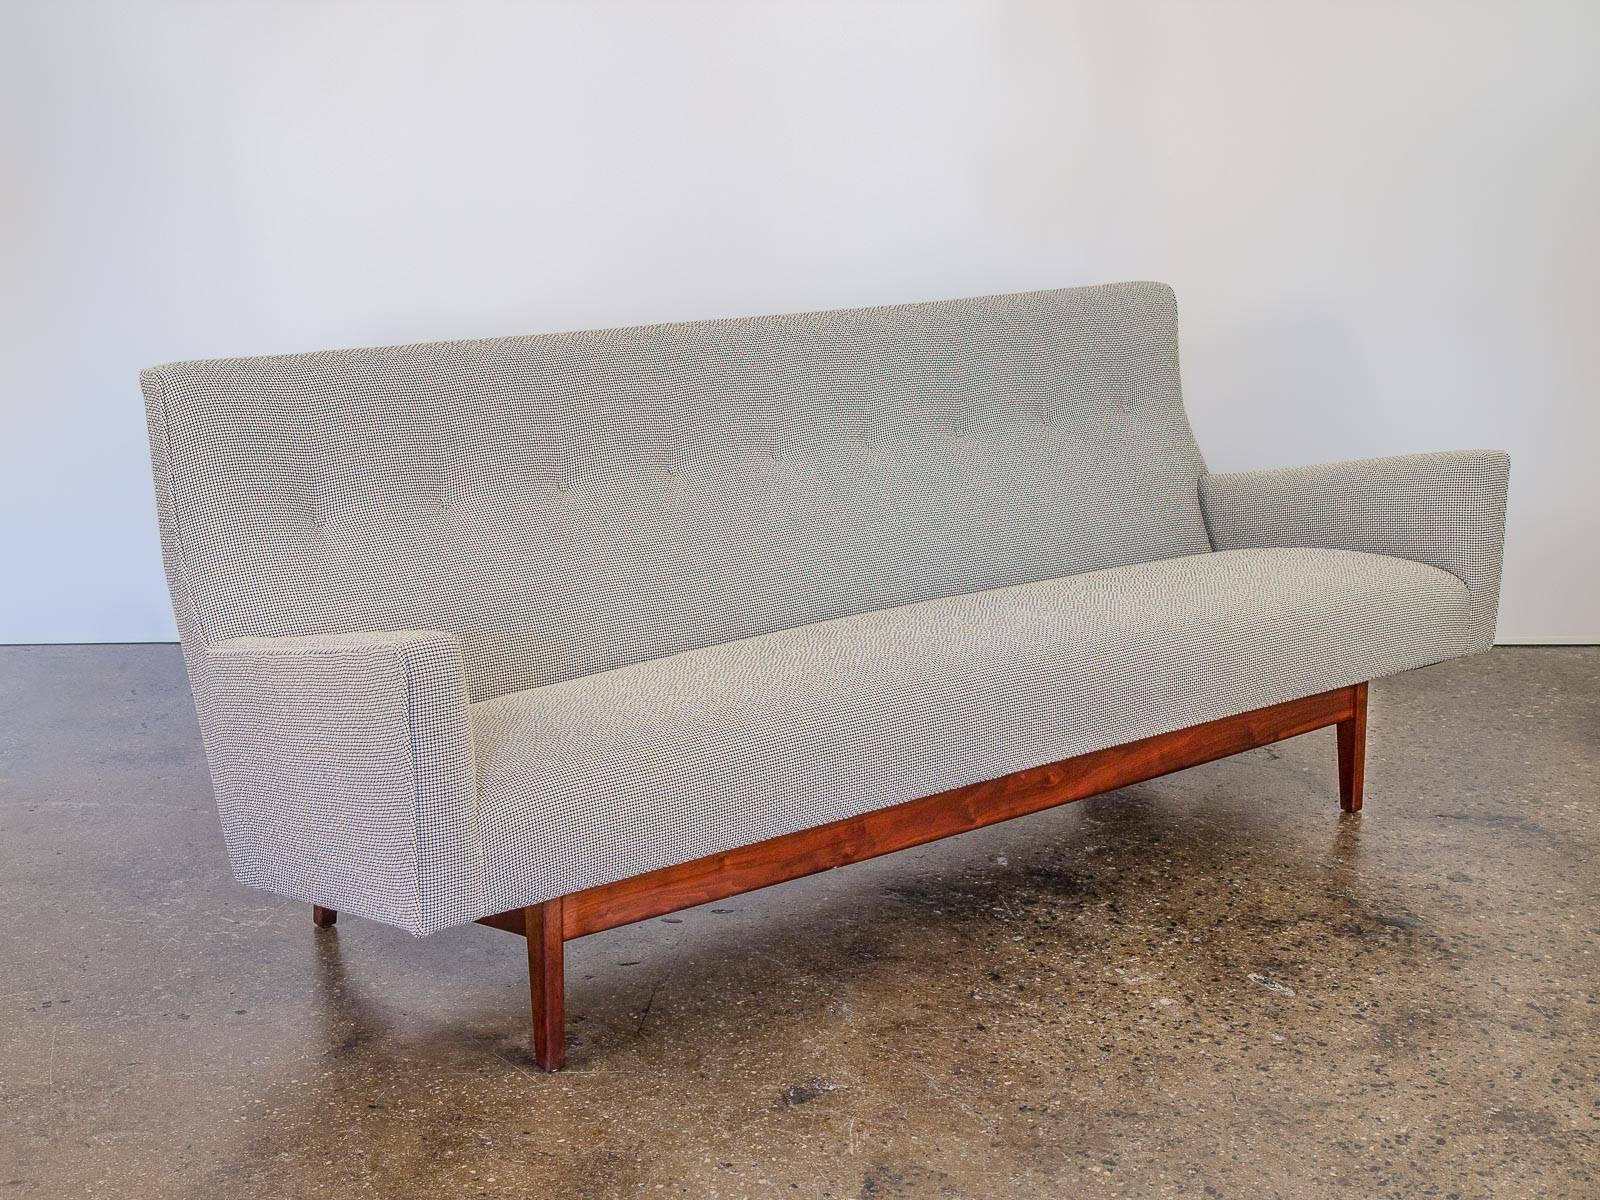 Scarce, highly sought after U-150 sofa designed by Jens Risom. This stylish robust sofa is newly upholstered in a beautiful Colline Kvadrat Maharam fabric. The moire texture of the fabric compliments the angular arms and jaunty curvature of the